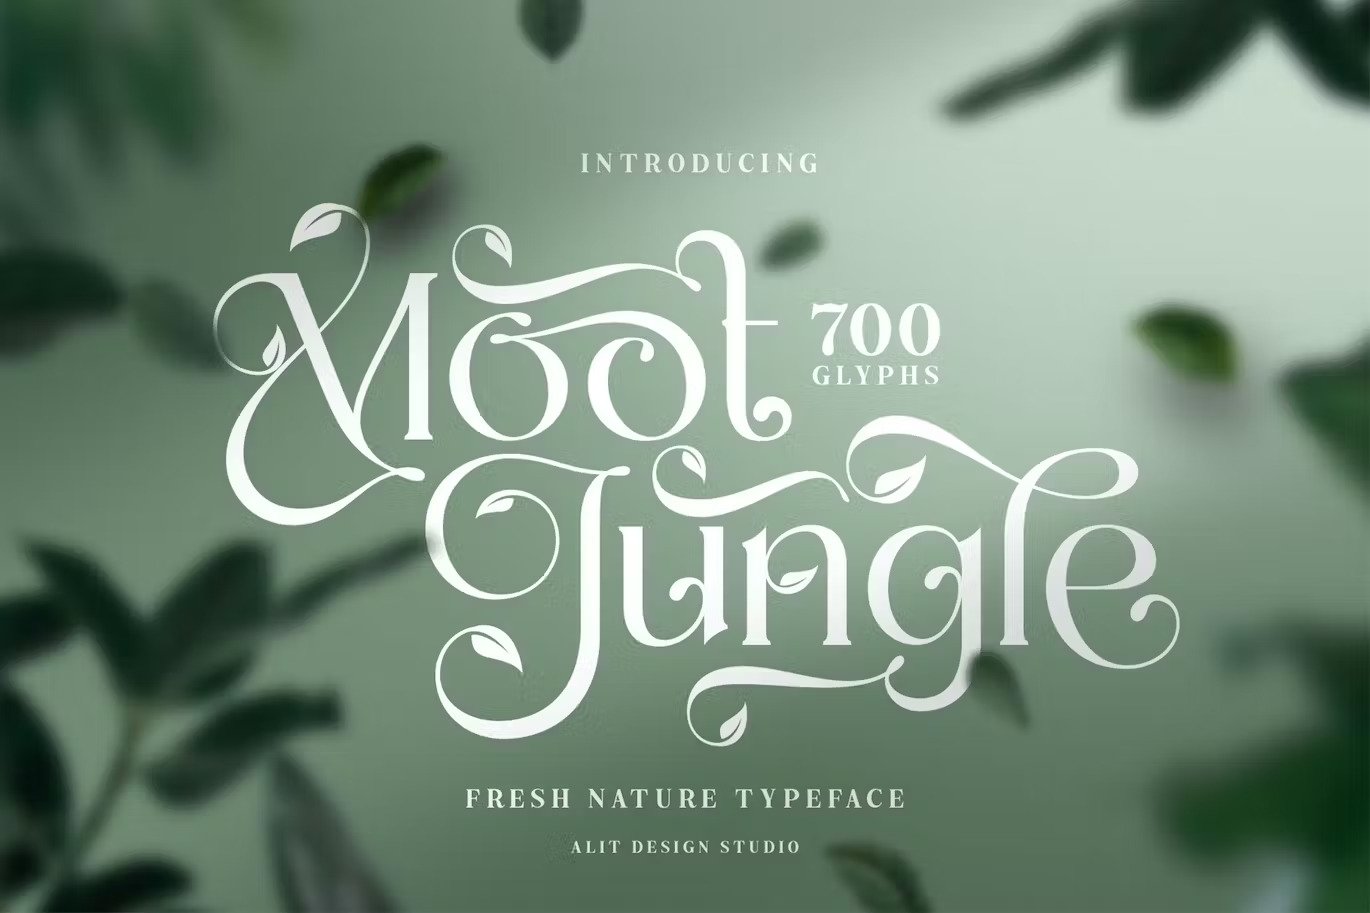 A fresh nature typeface